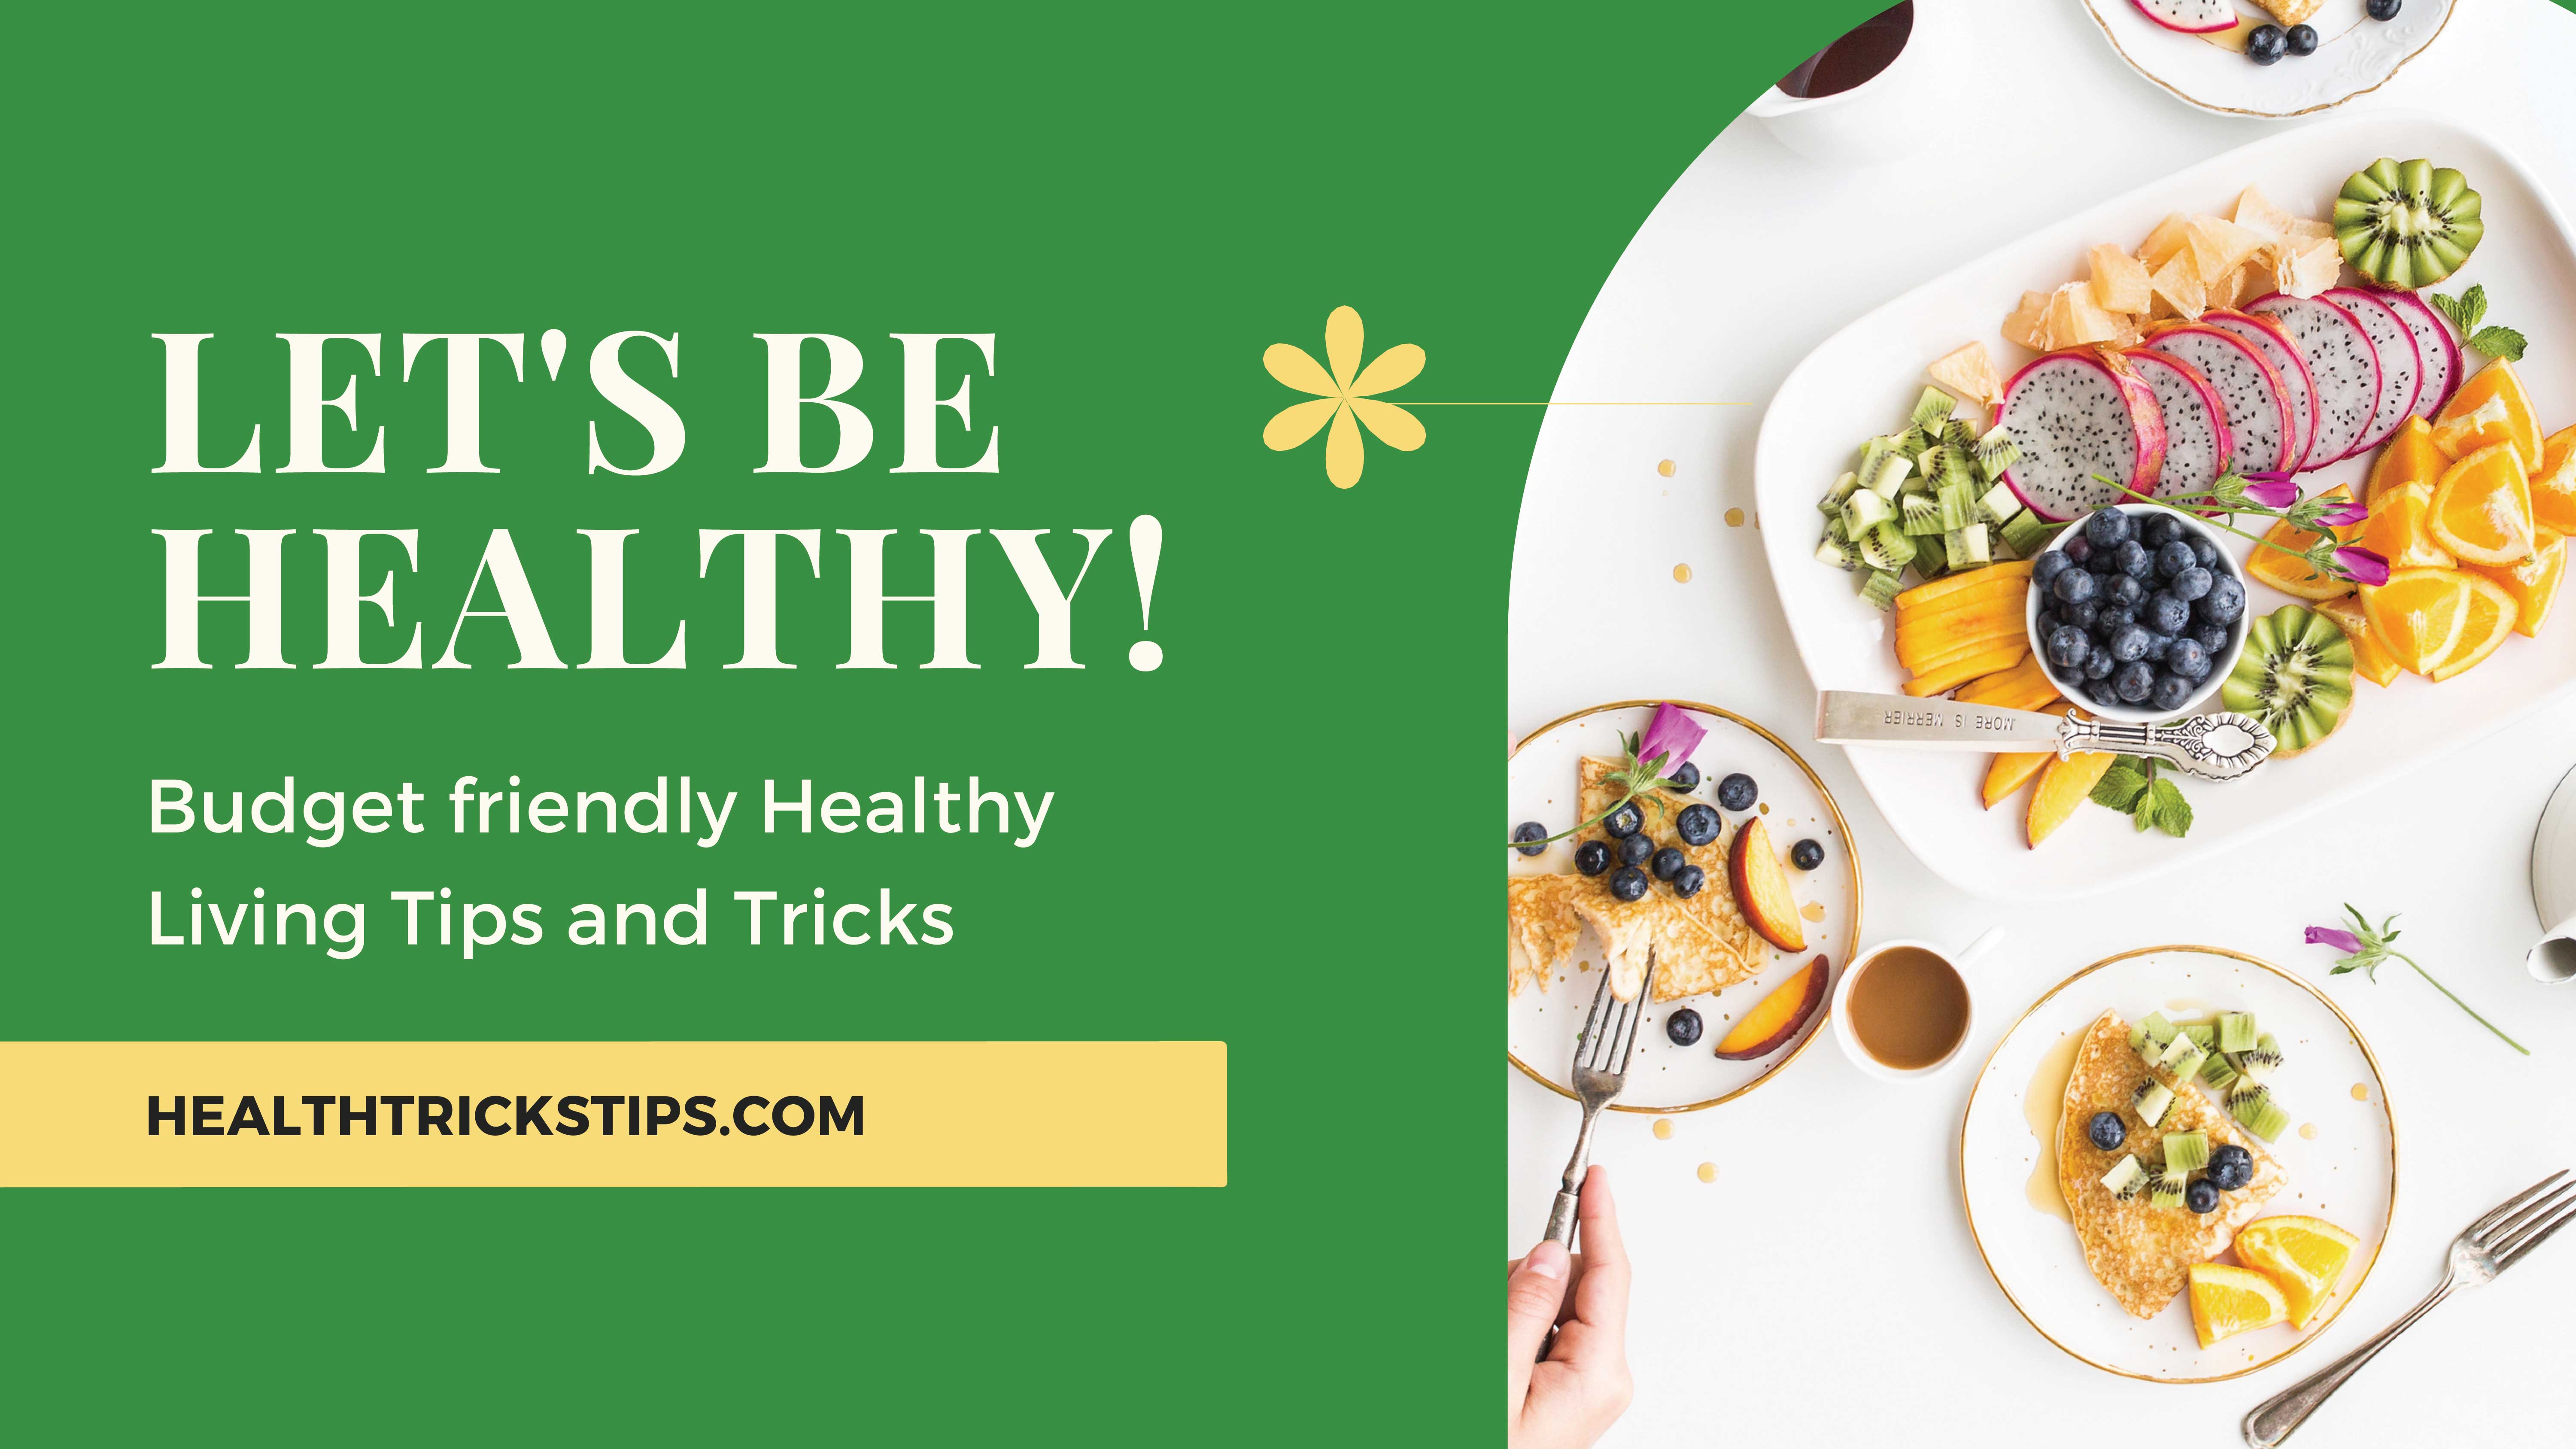 Budget friendly Healthy Living Tips and Tricks